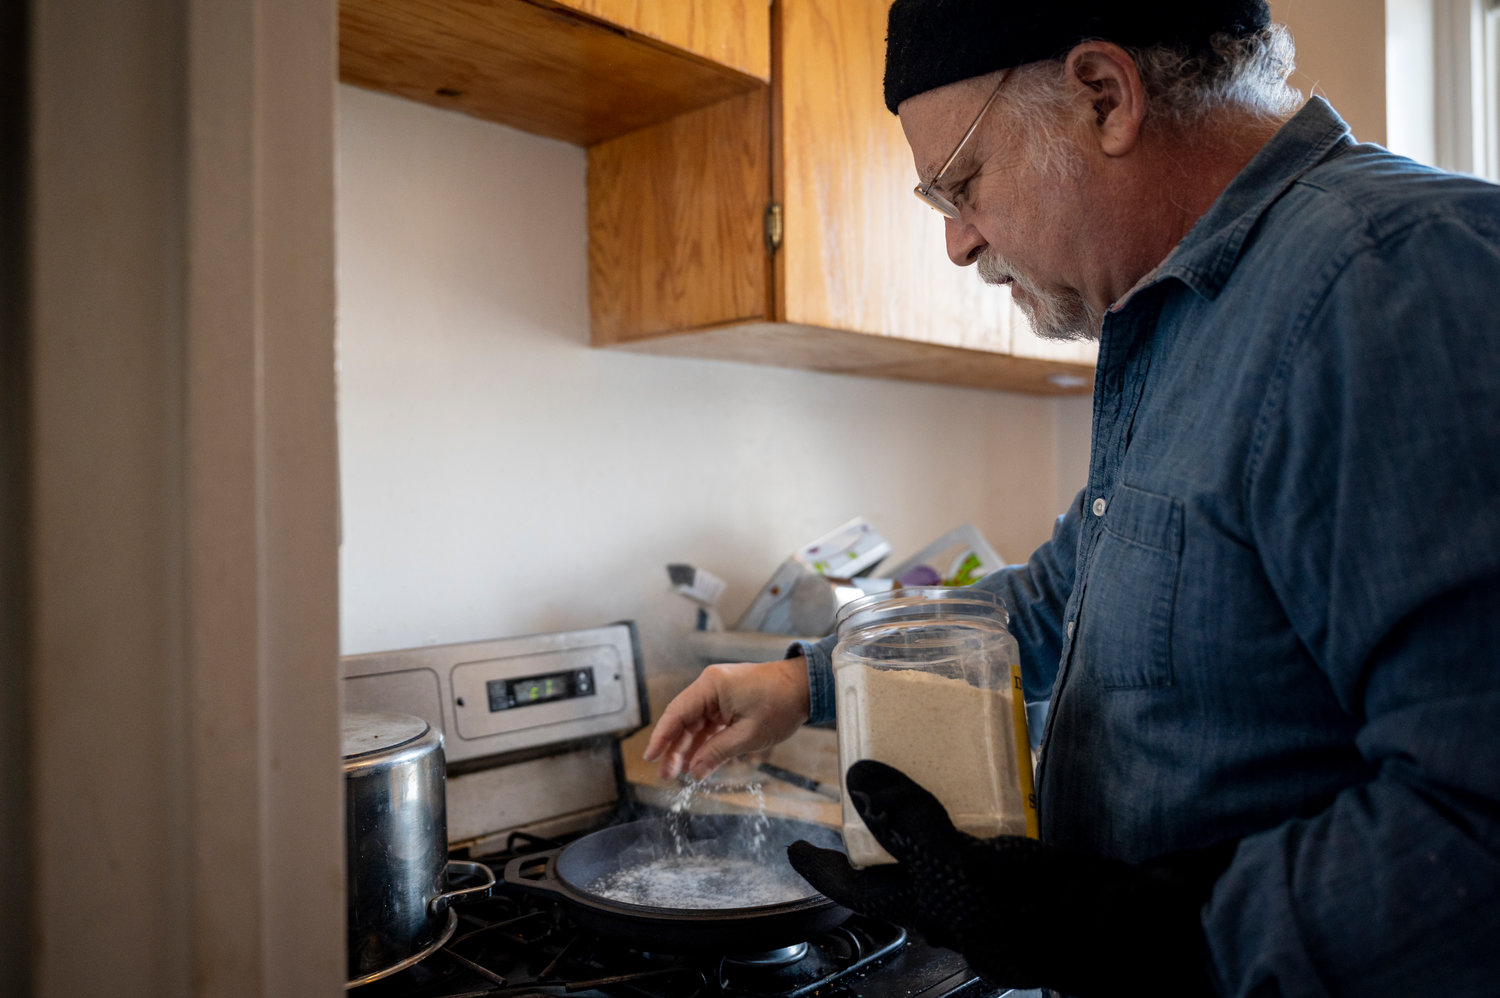 Early in the coronavirus pandemic, Arnie Adler says he discovered he makes a really good loaf of sourdough bread. Now he’s bartering his bakery creations with neighbors for other homemade food items.